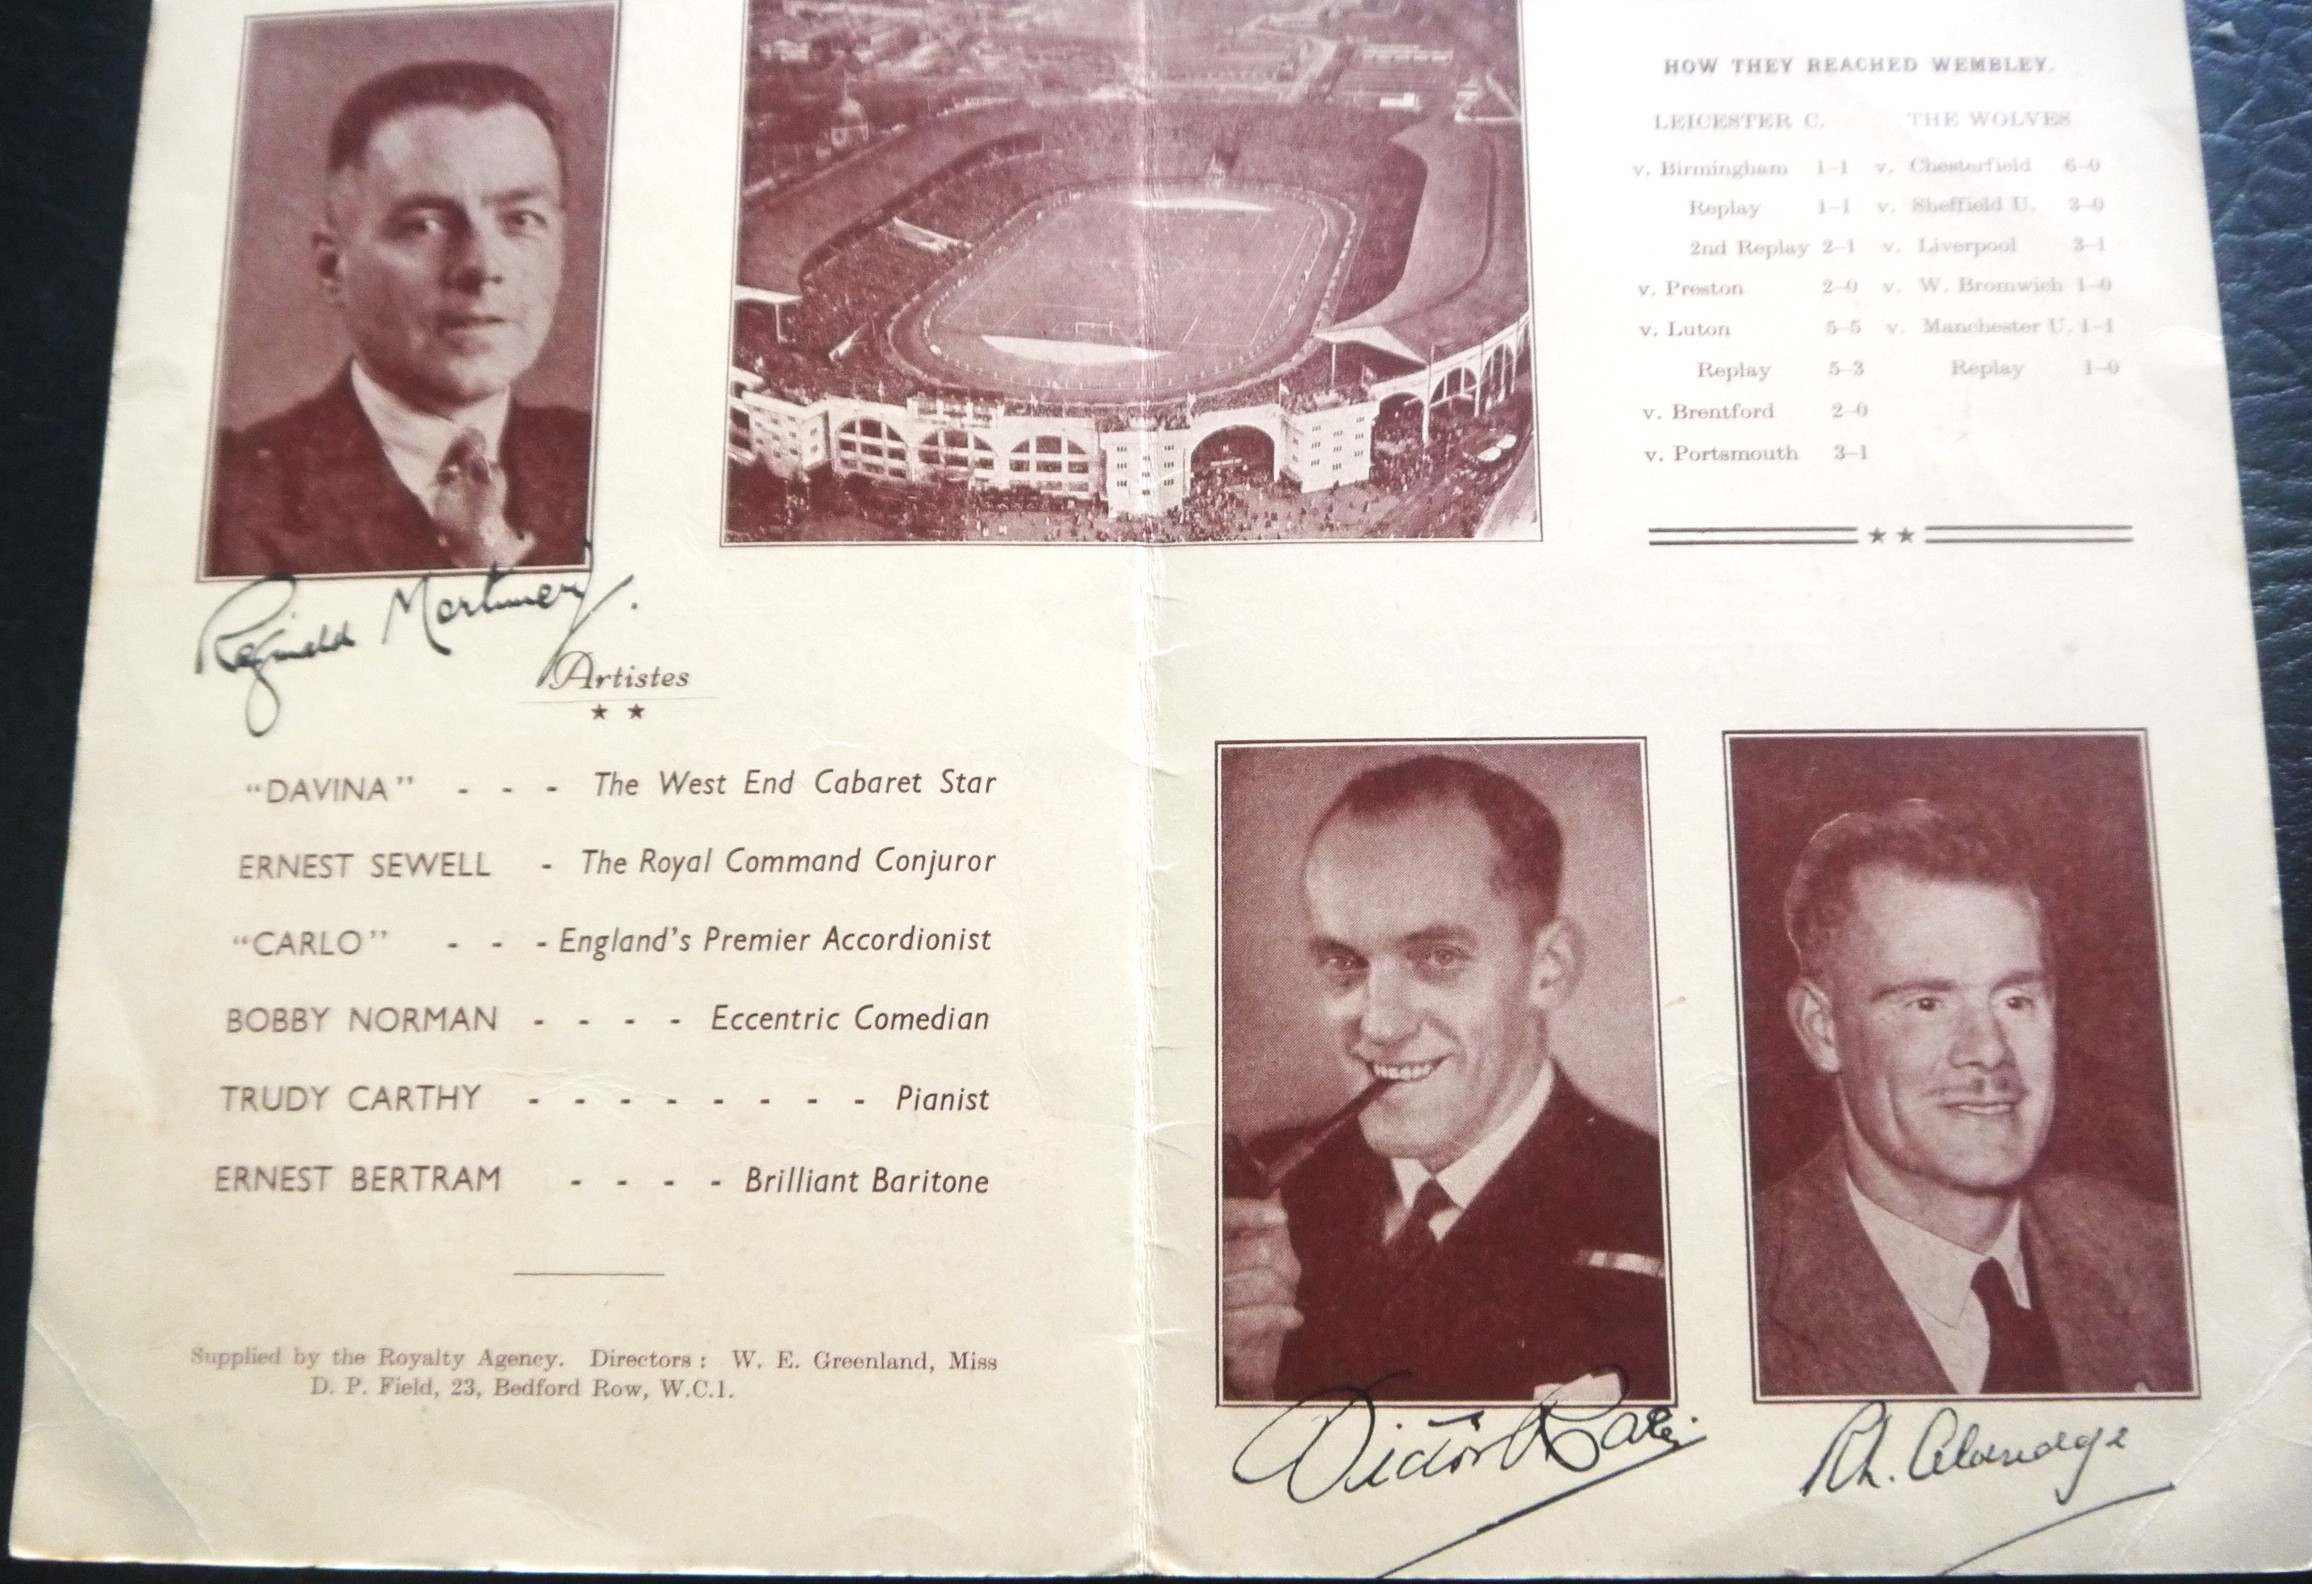 1949 FA CUP FINAL EVE OF THE FINAL RALLY PROGRAMME AUTOGRAPHED BY REFEREE & LINESMAN - Image 2 of 2